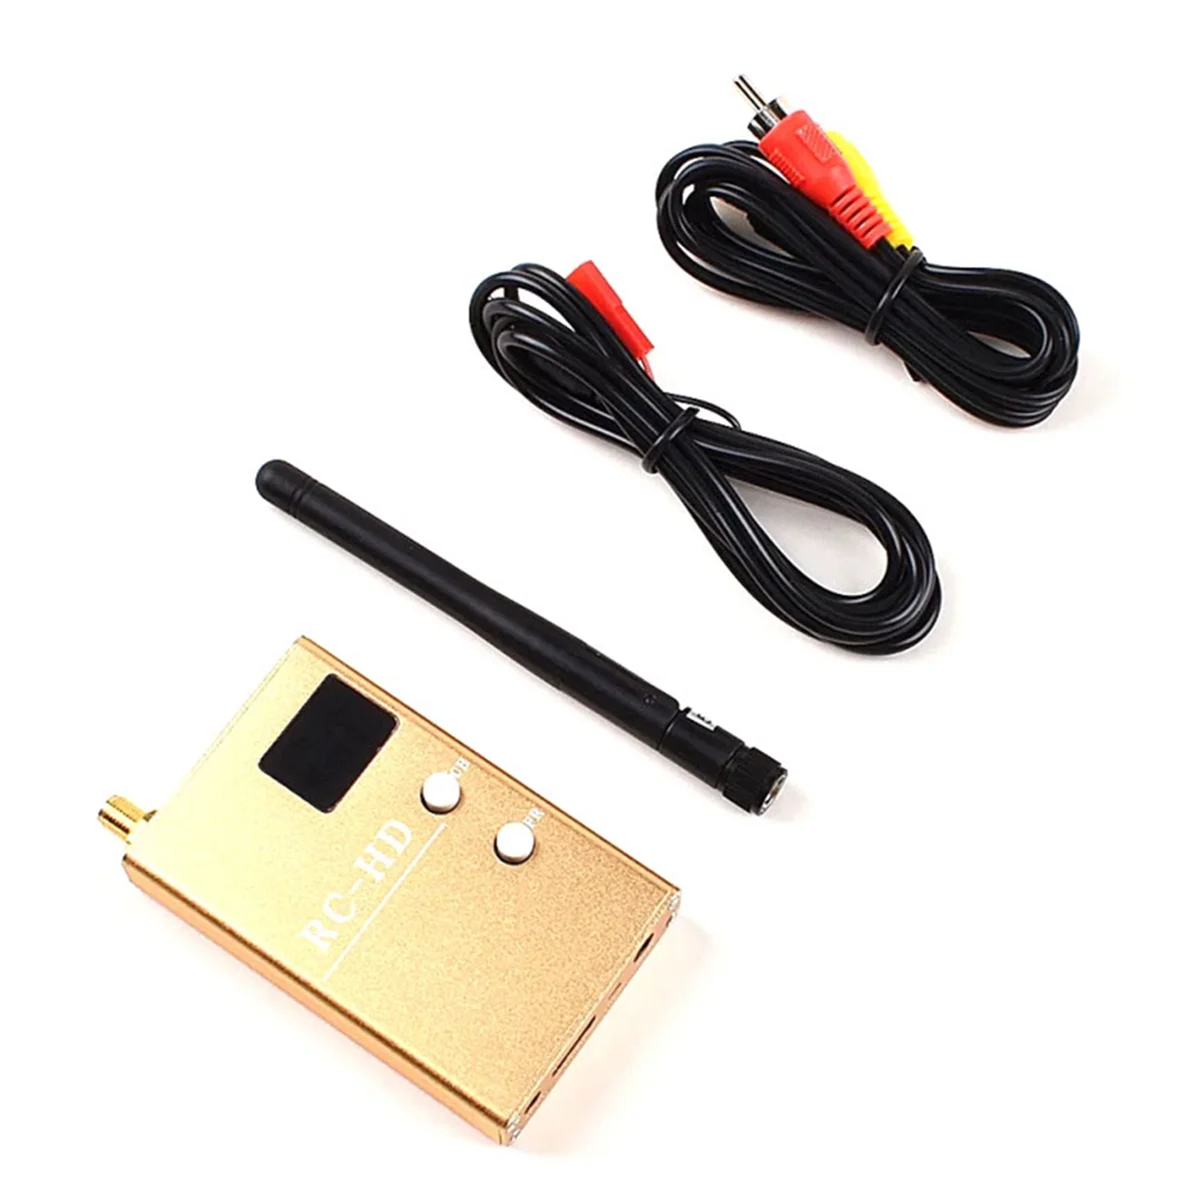 

RC832HD RC-HD FPV 5.8G 5.8GHz 48CH 48 Channels Receiver HDMI-Compatible with A/V and Power Cables for Quadcopter F450